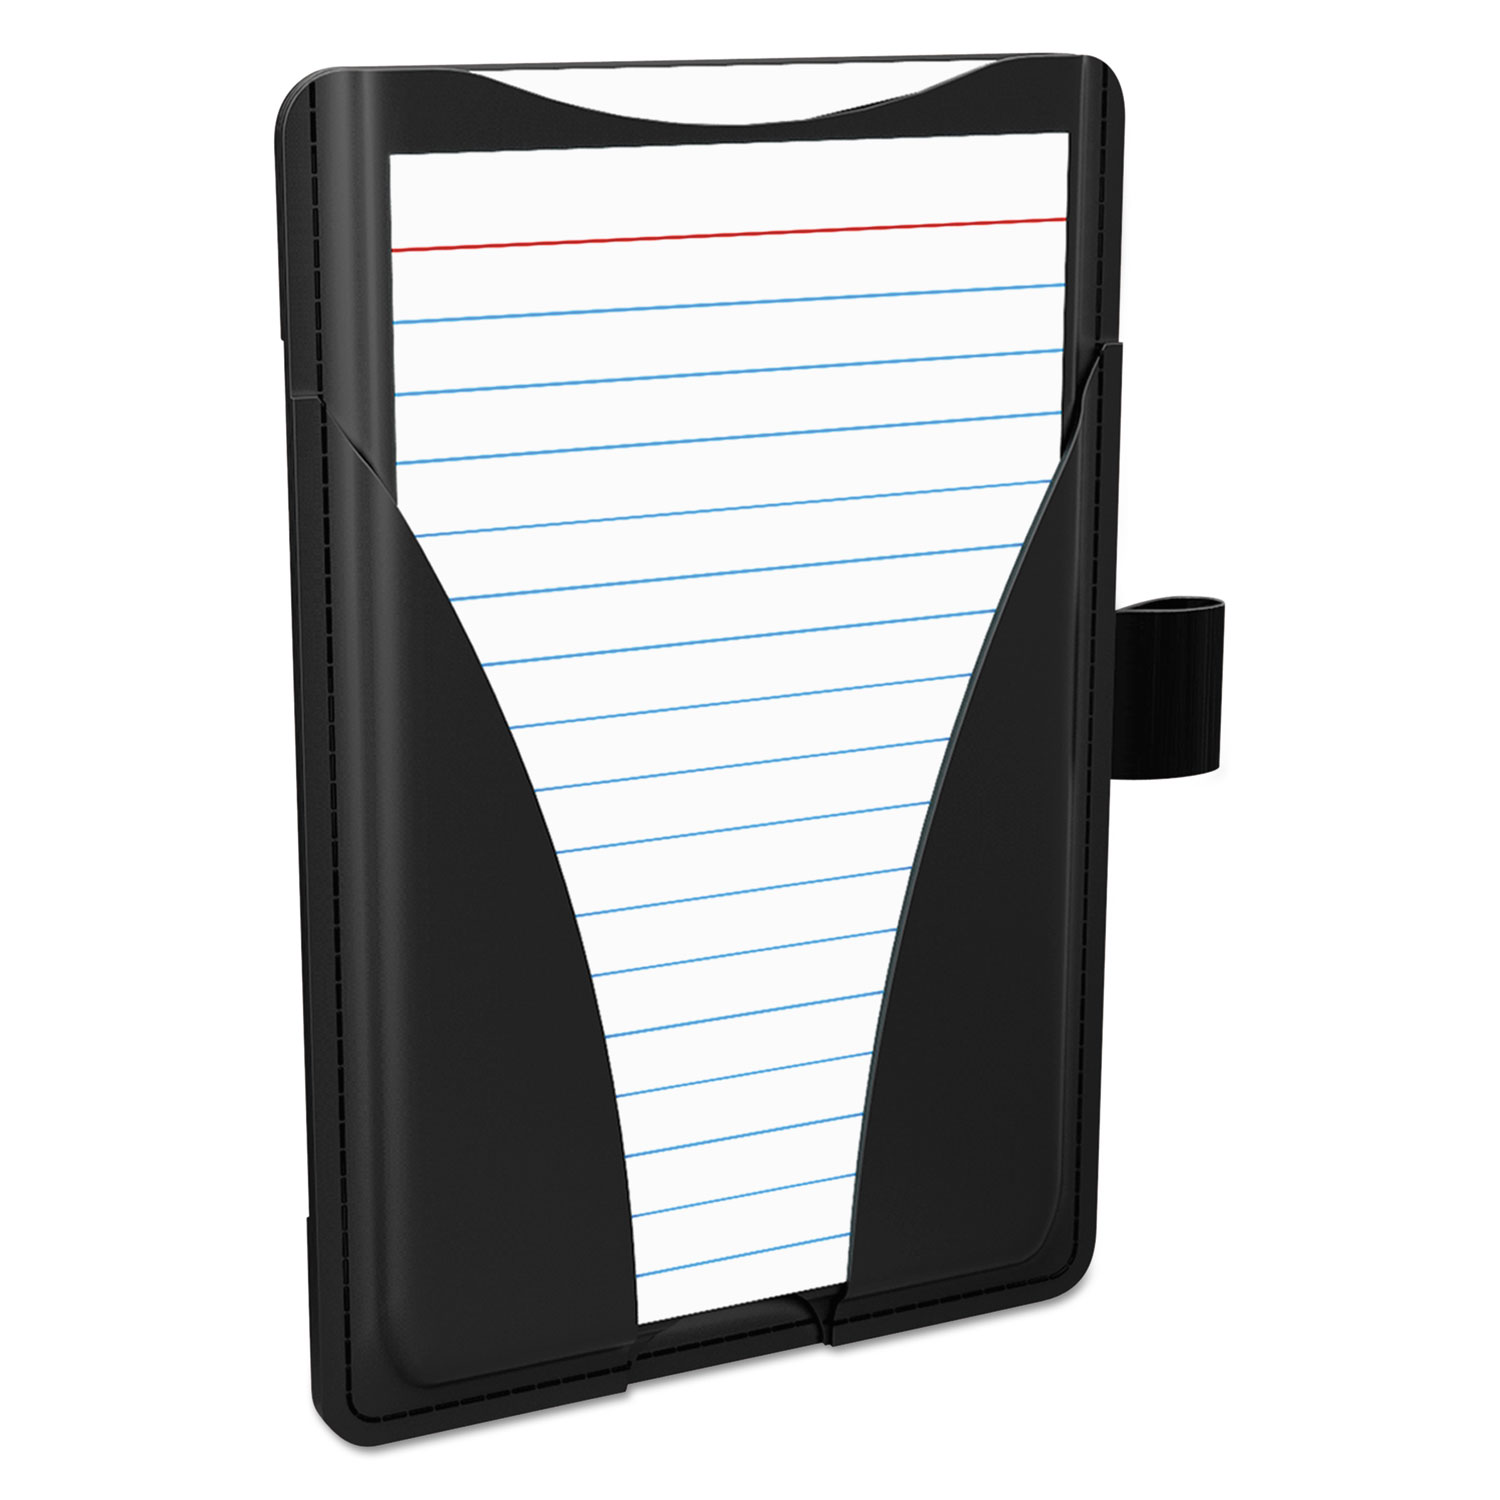  Oxford 63519 At Hand Note Card Case, 25 Capacity, 3 3/4d x 5 1/2w, Black (OXF63519) 